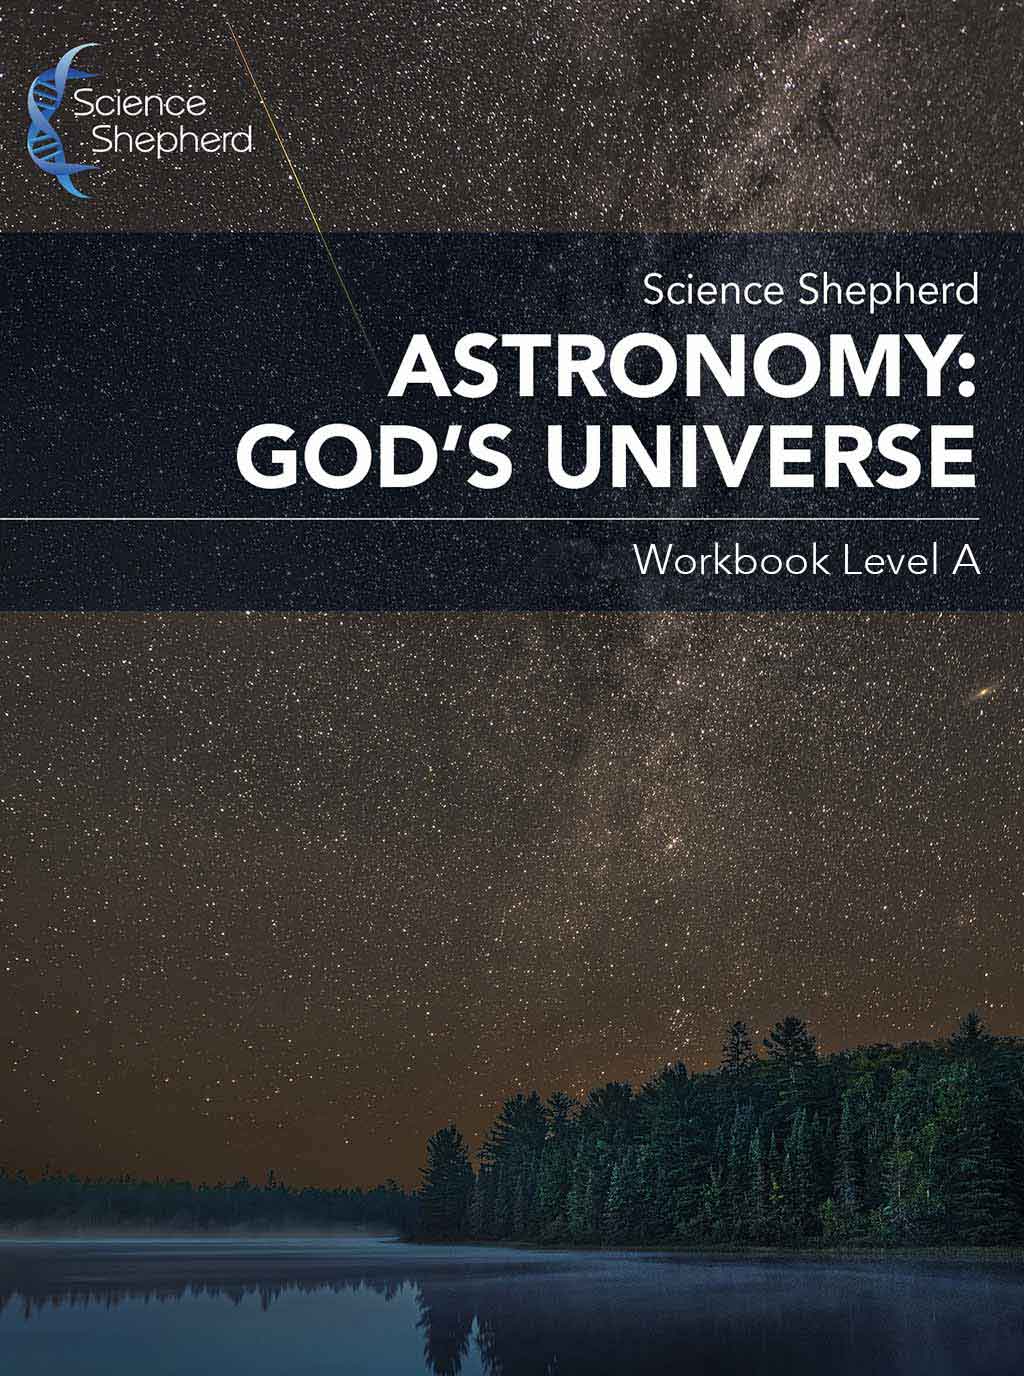 Christian astronomy student workbook Level A cover of the night sky